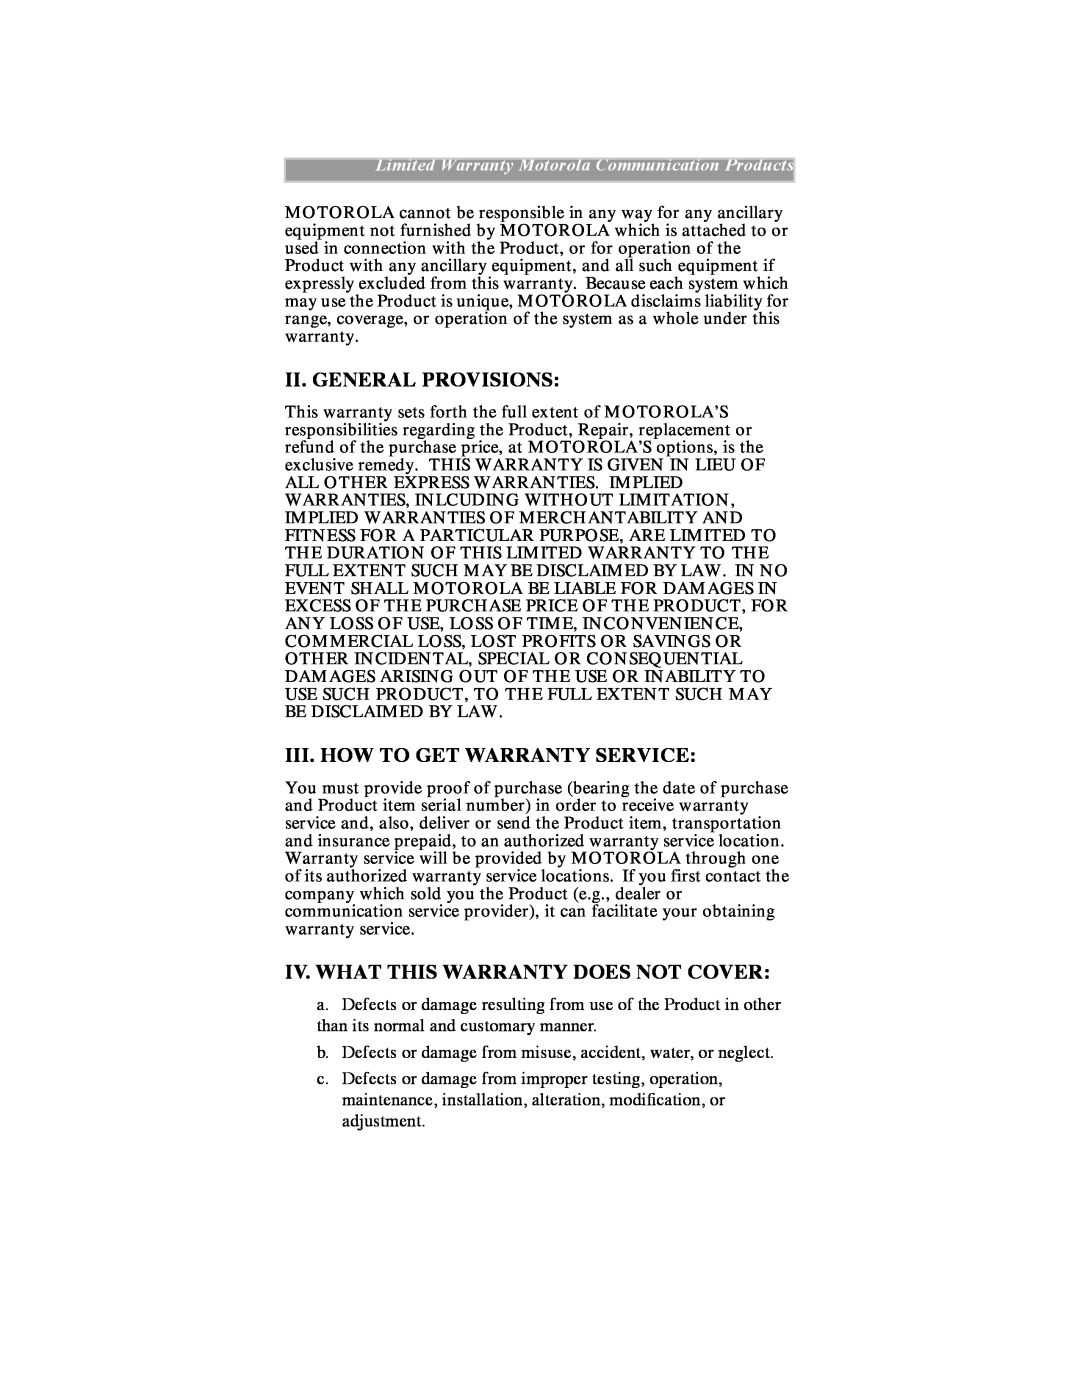 Motorola iDEN manual Iii. How To Get Warranty Service, Iv. What This Warranty Does Not Cover, Ii. General Provisions 